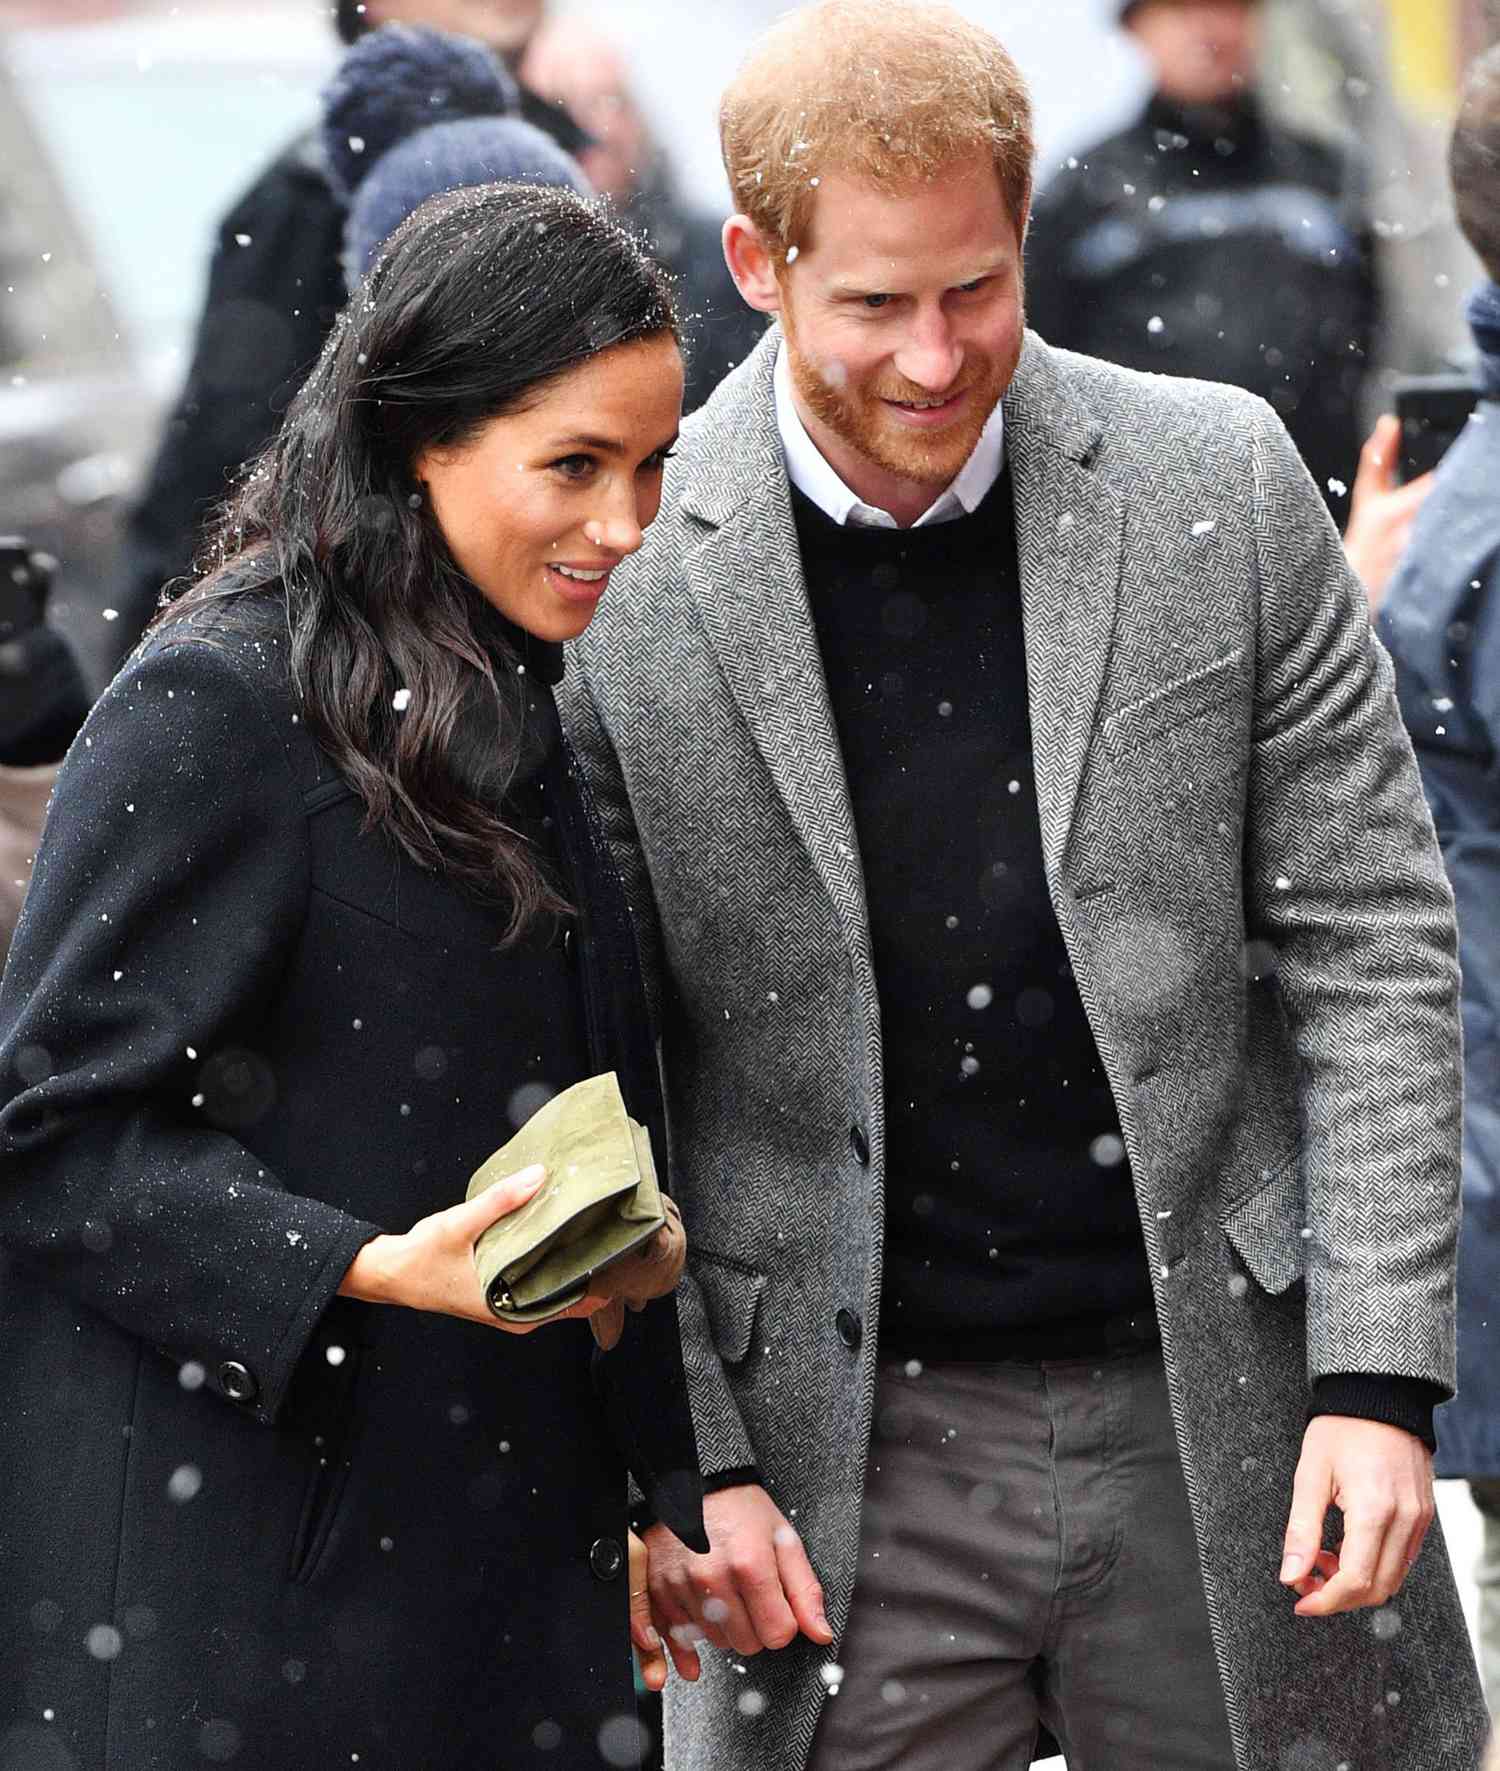 Prince Harry and Meghan Duchess of Sussex visit to Bristol, UK - 01 Feb 2019